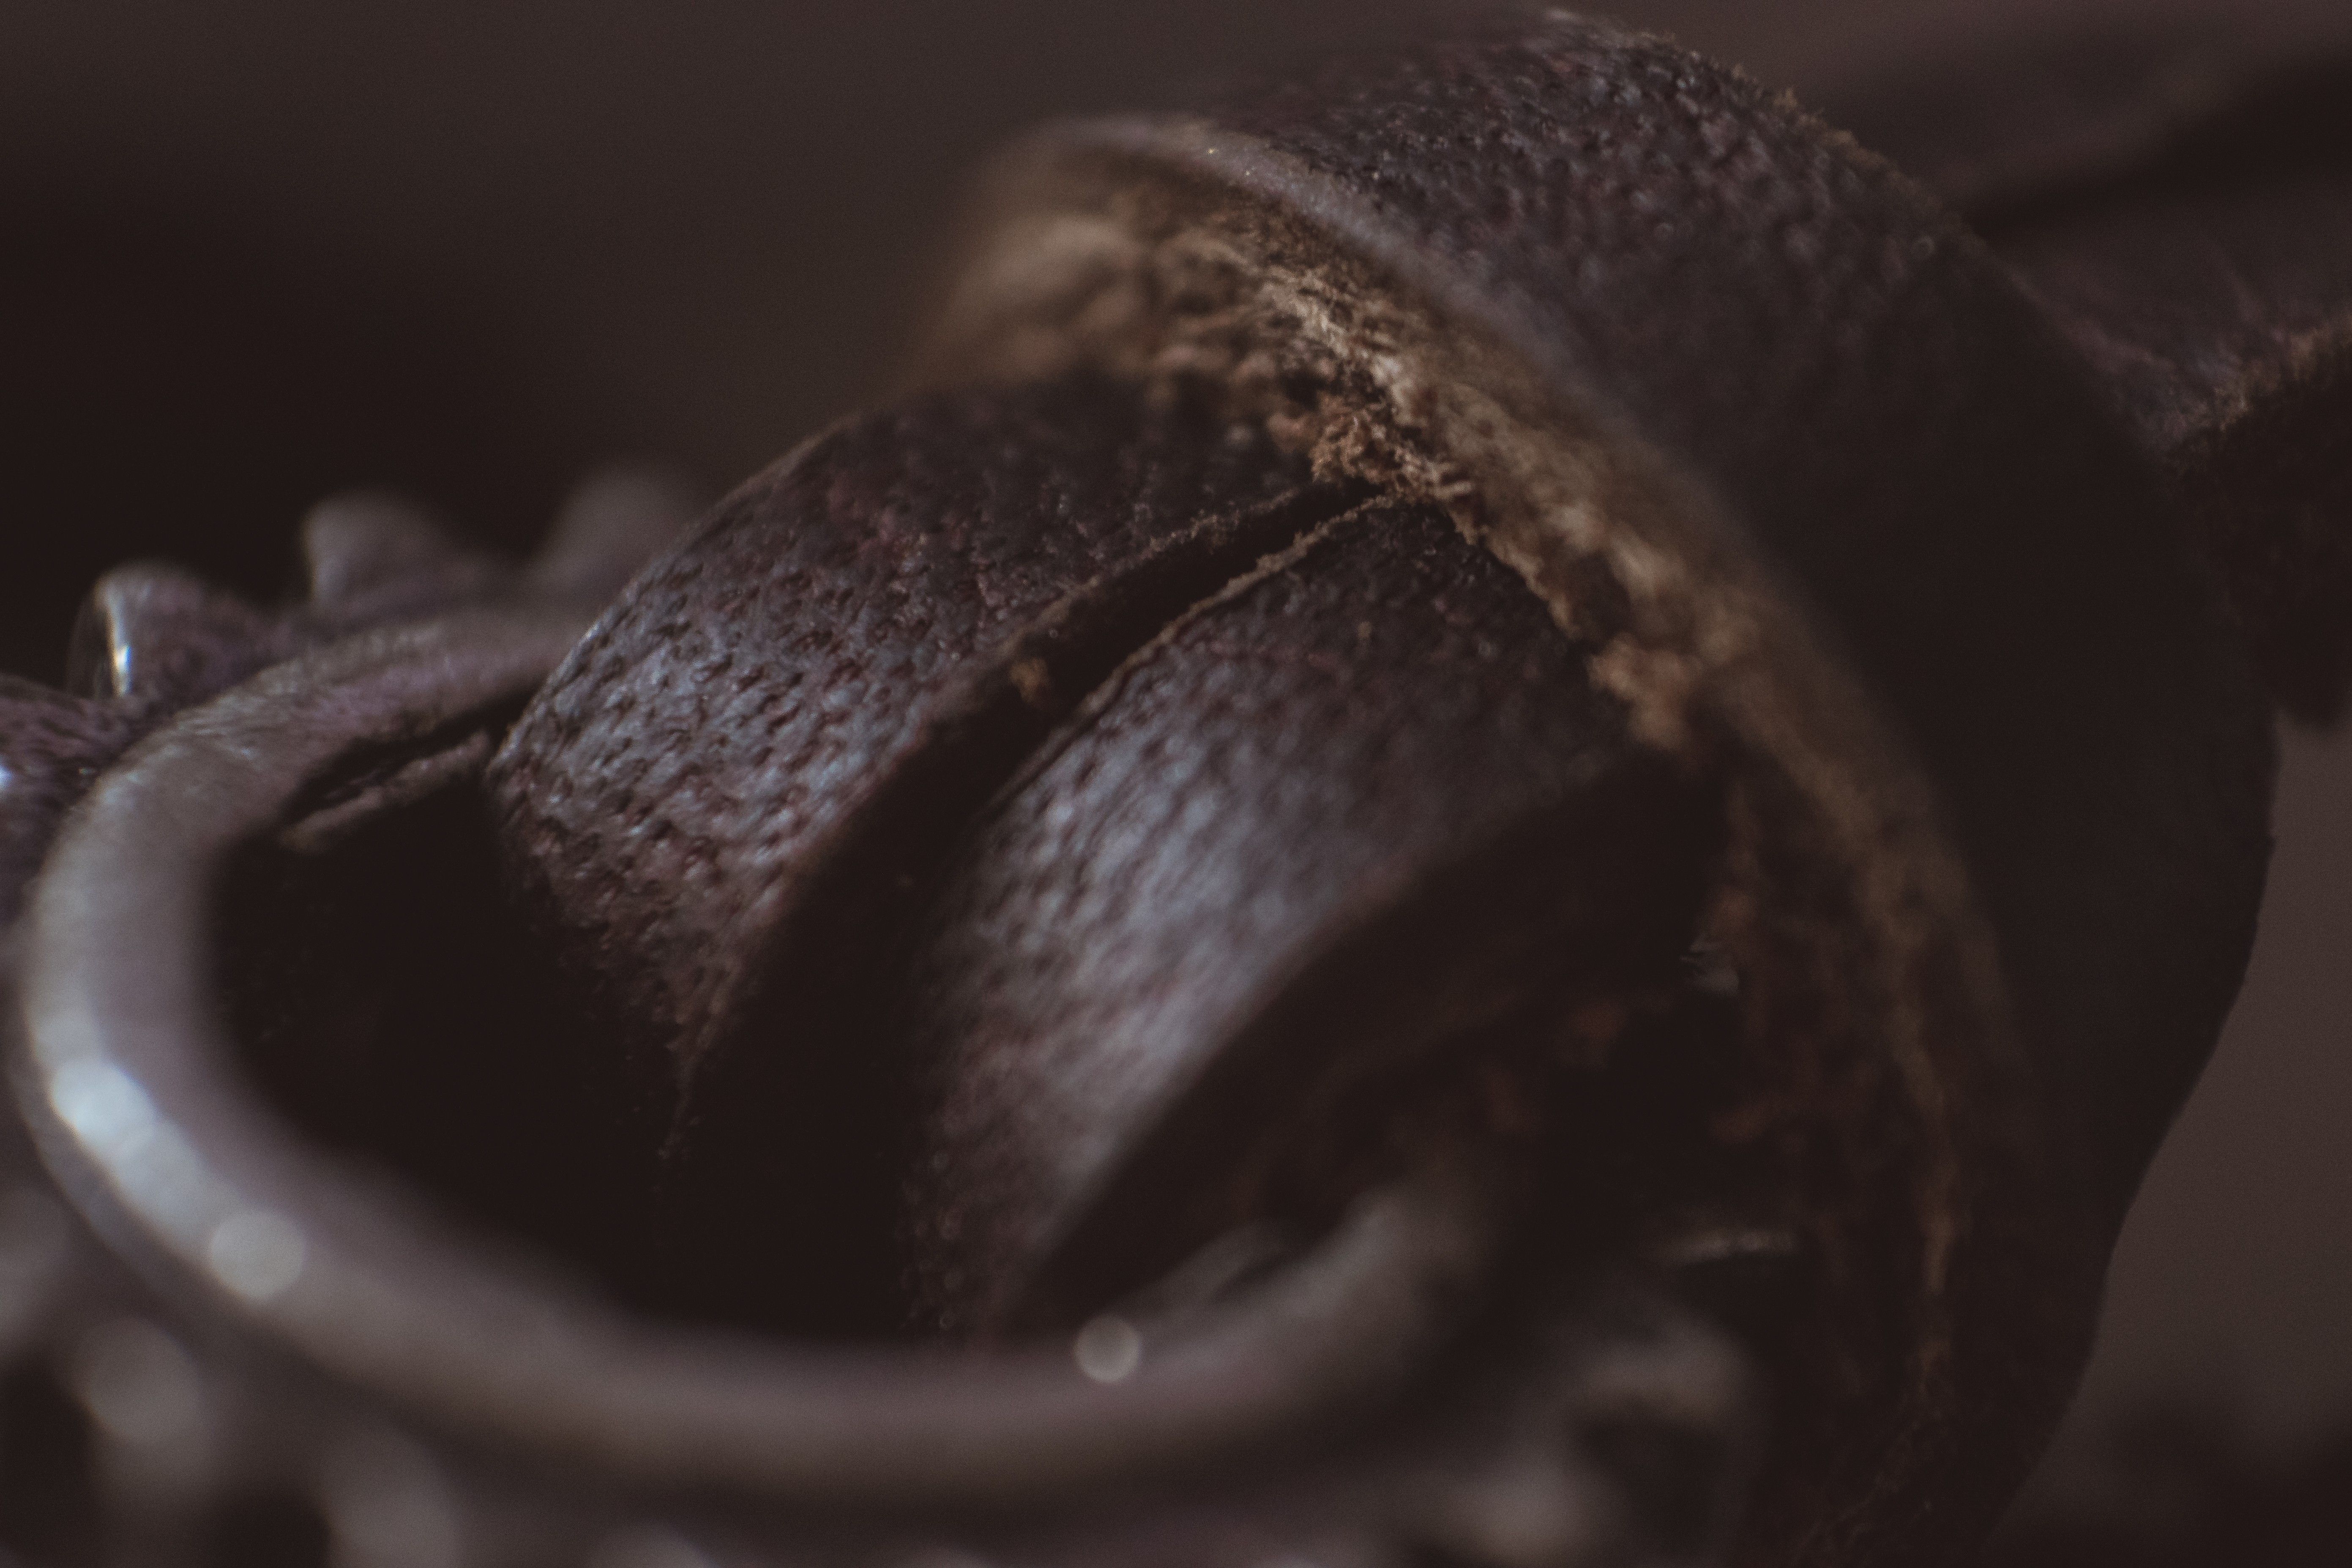 Wallpaper, black, food, red, necklace, gears, dessert, chocolate cake, eye, close up, macro photography, flavor 5565x3710